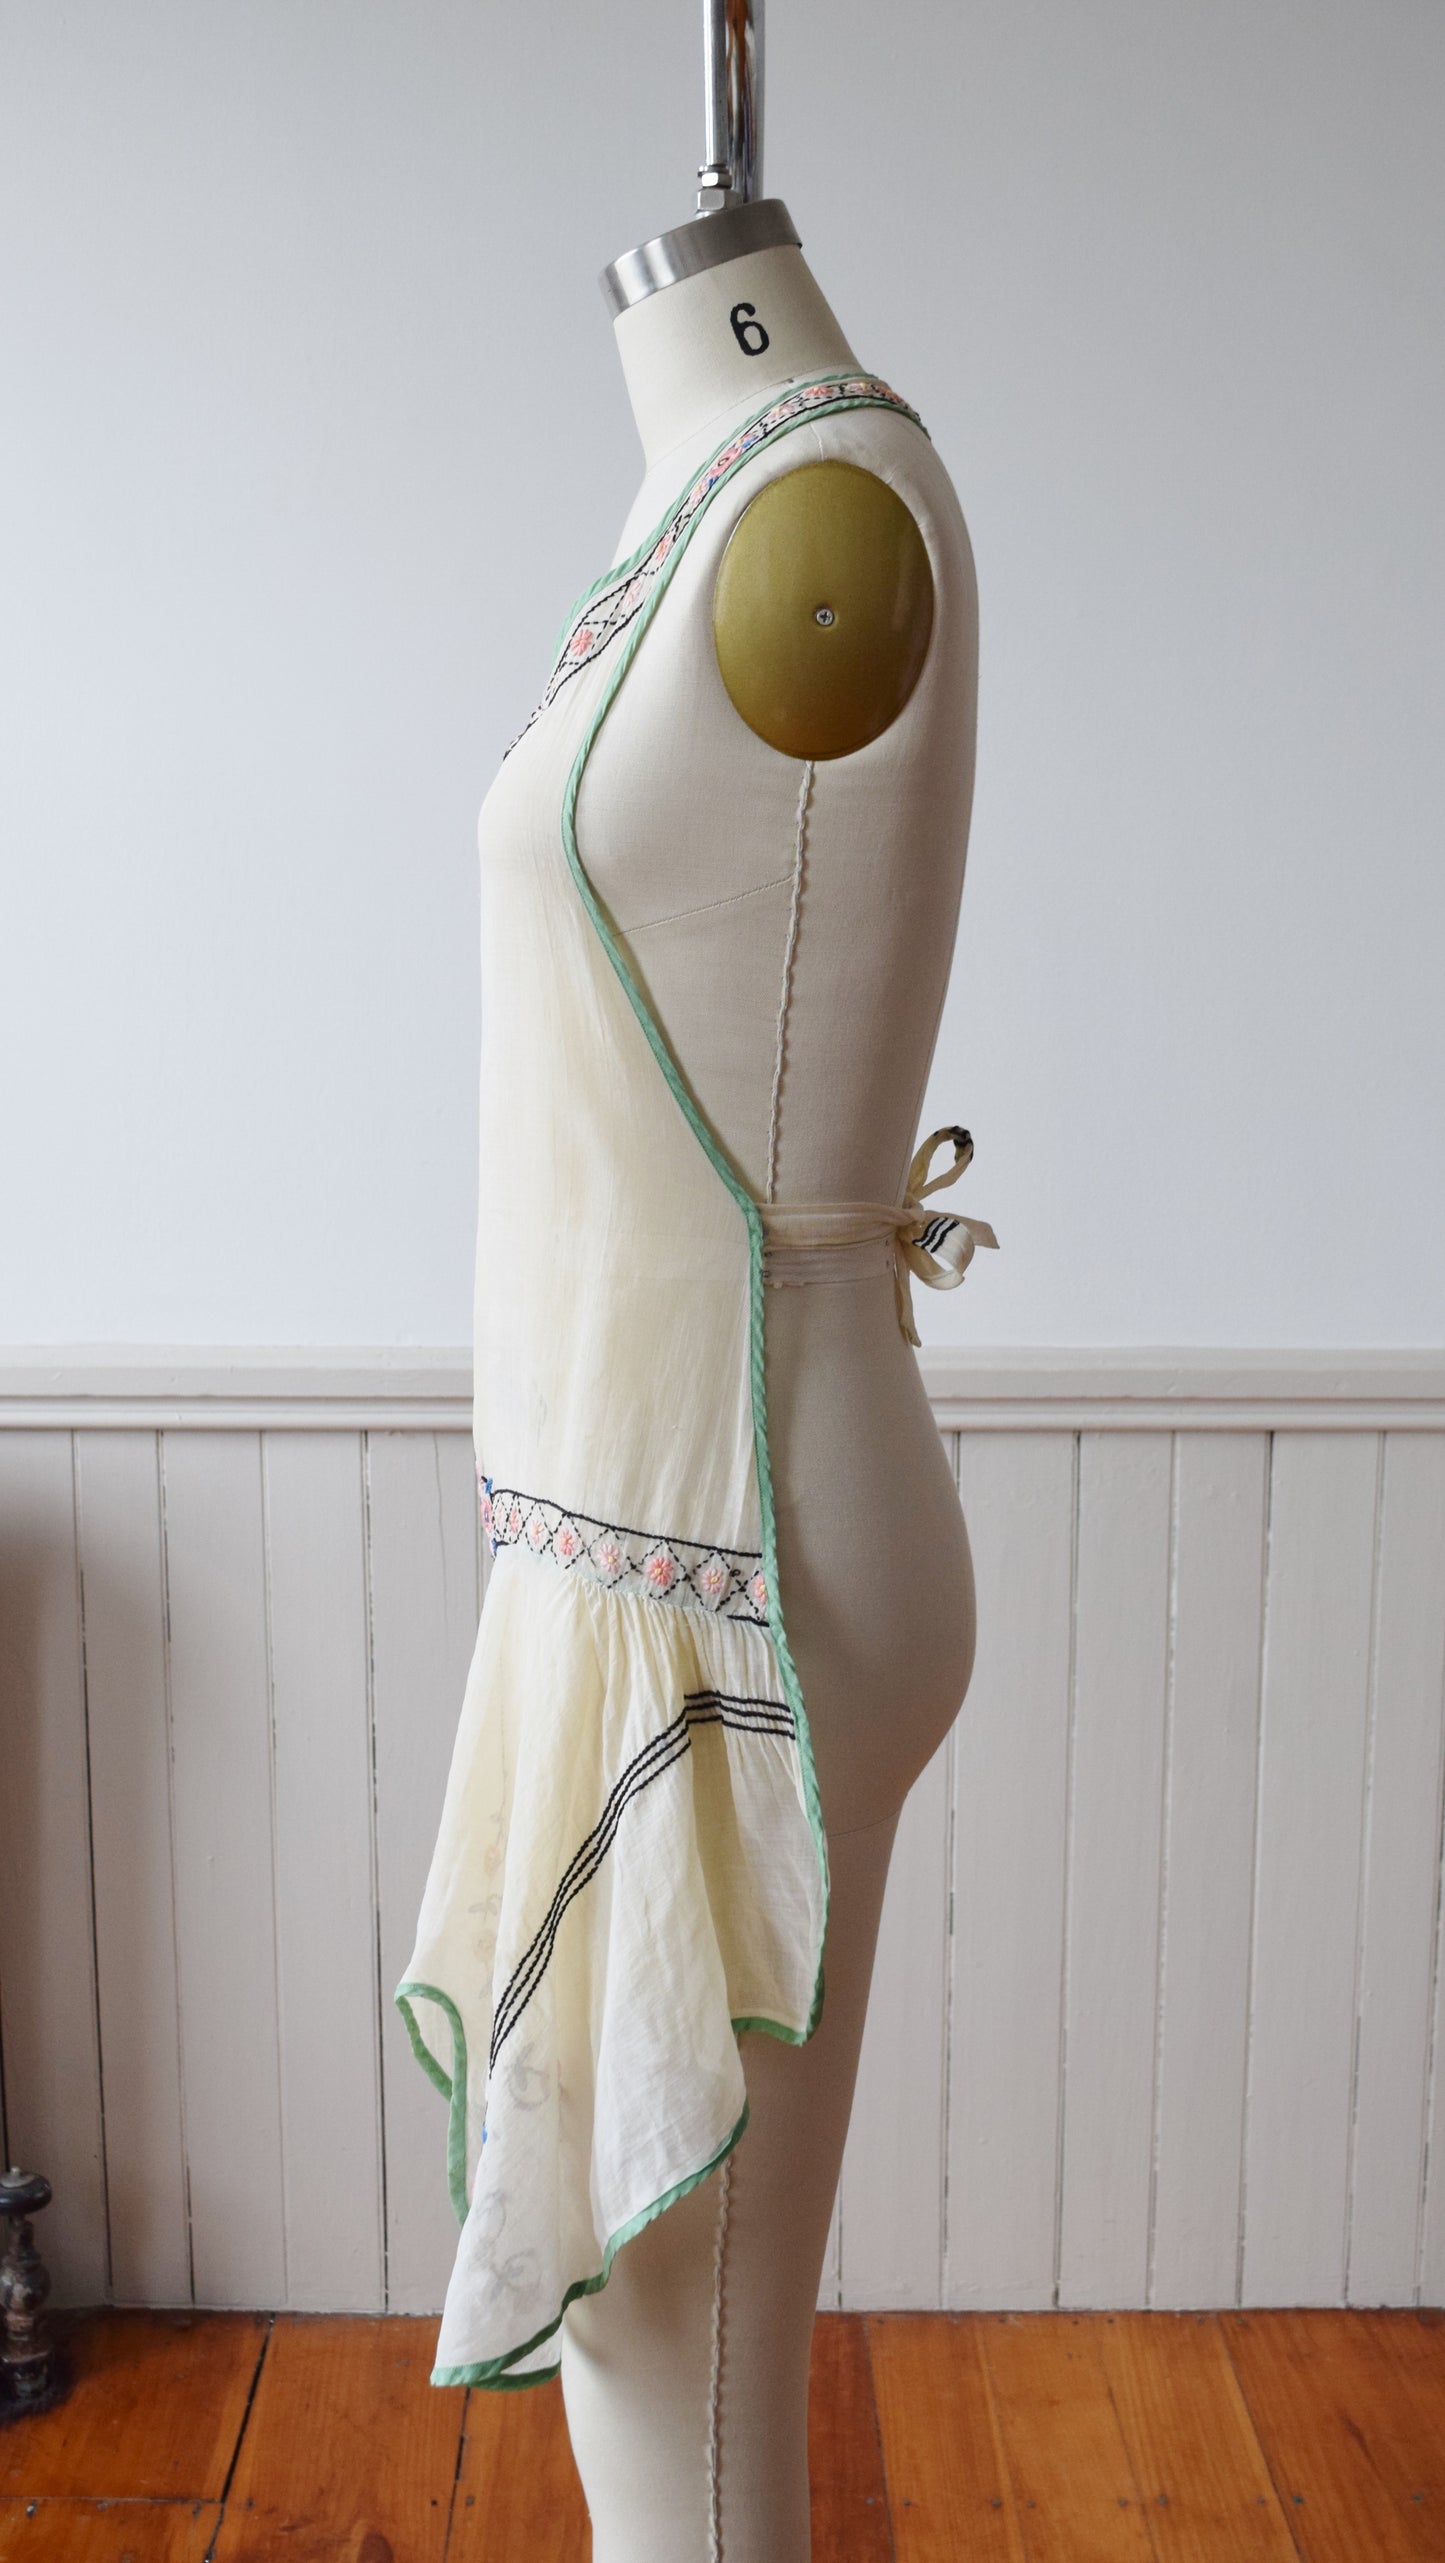 1920s Hand Embroidered Ruffle Apron